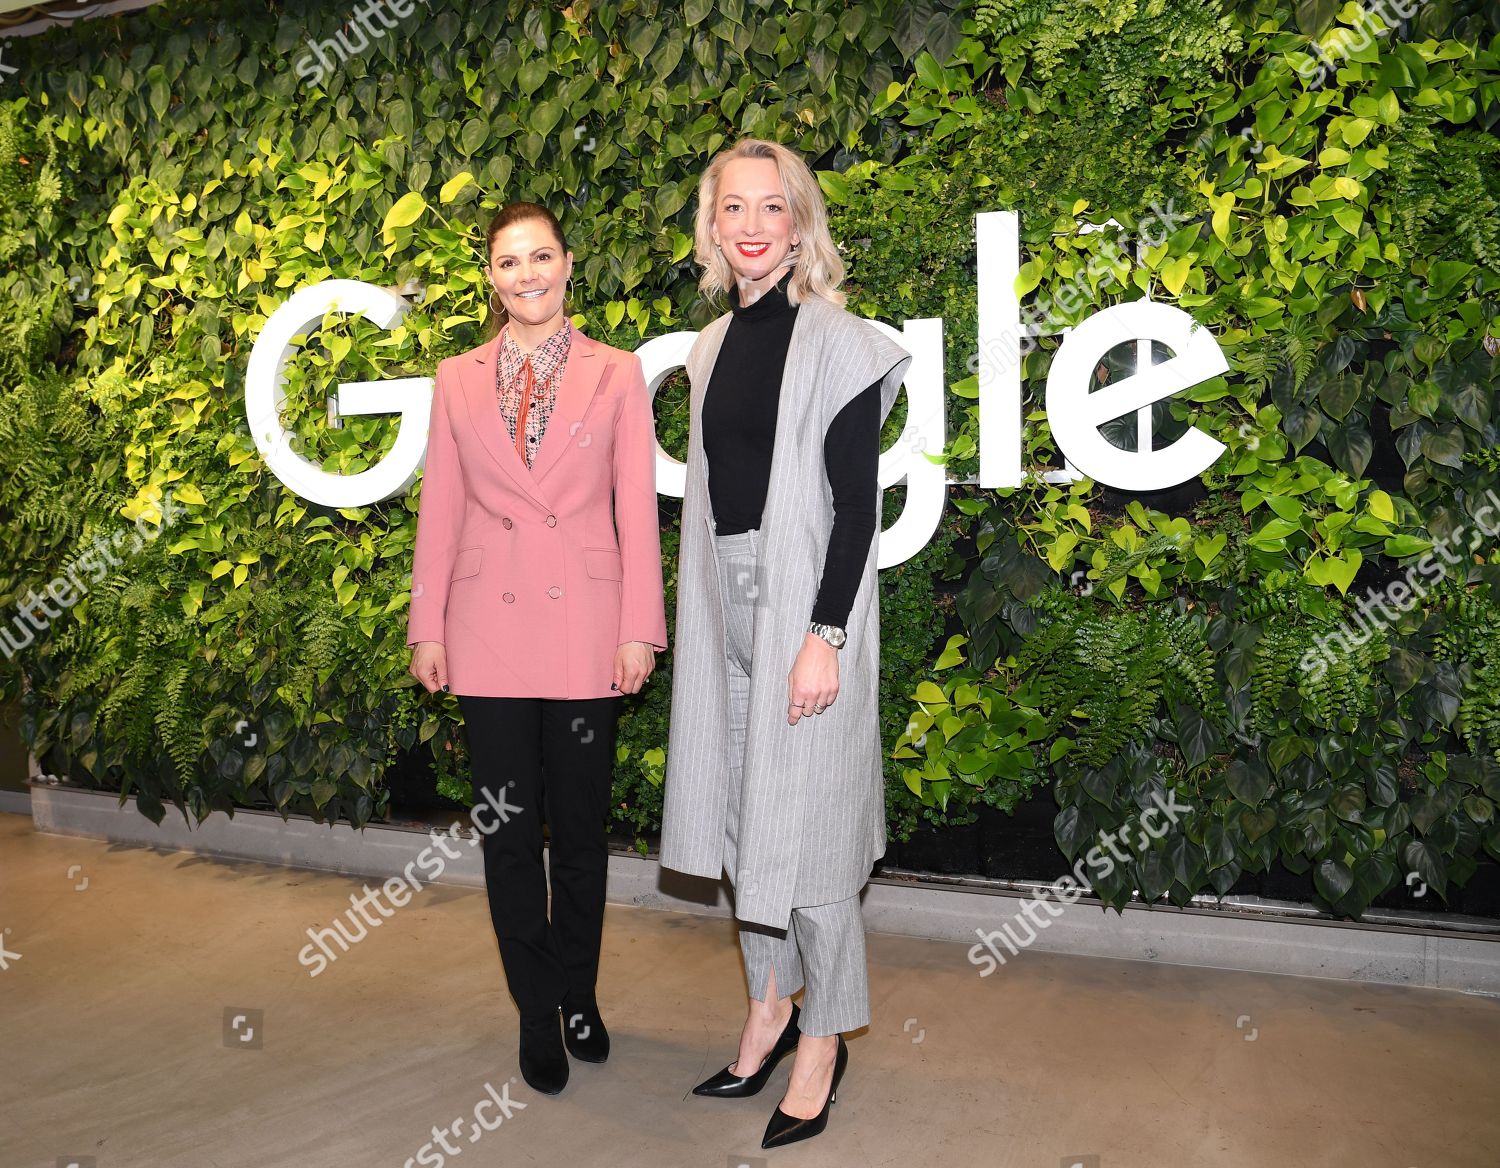 crown-princess-victoria-visits-the-google-offices-stockholm-sweden-shutterstock-editorial-10145653a.jpg